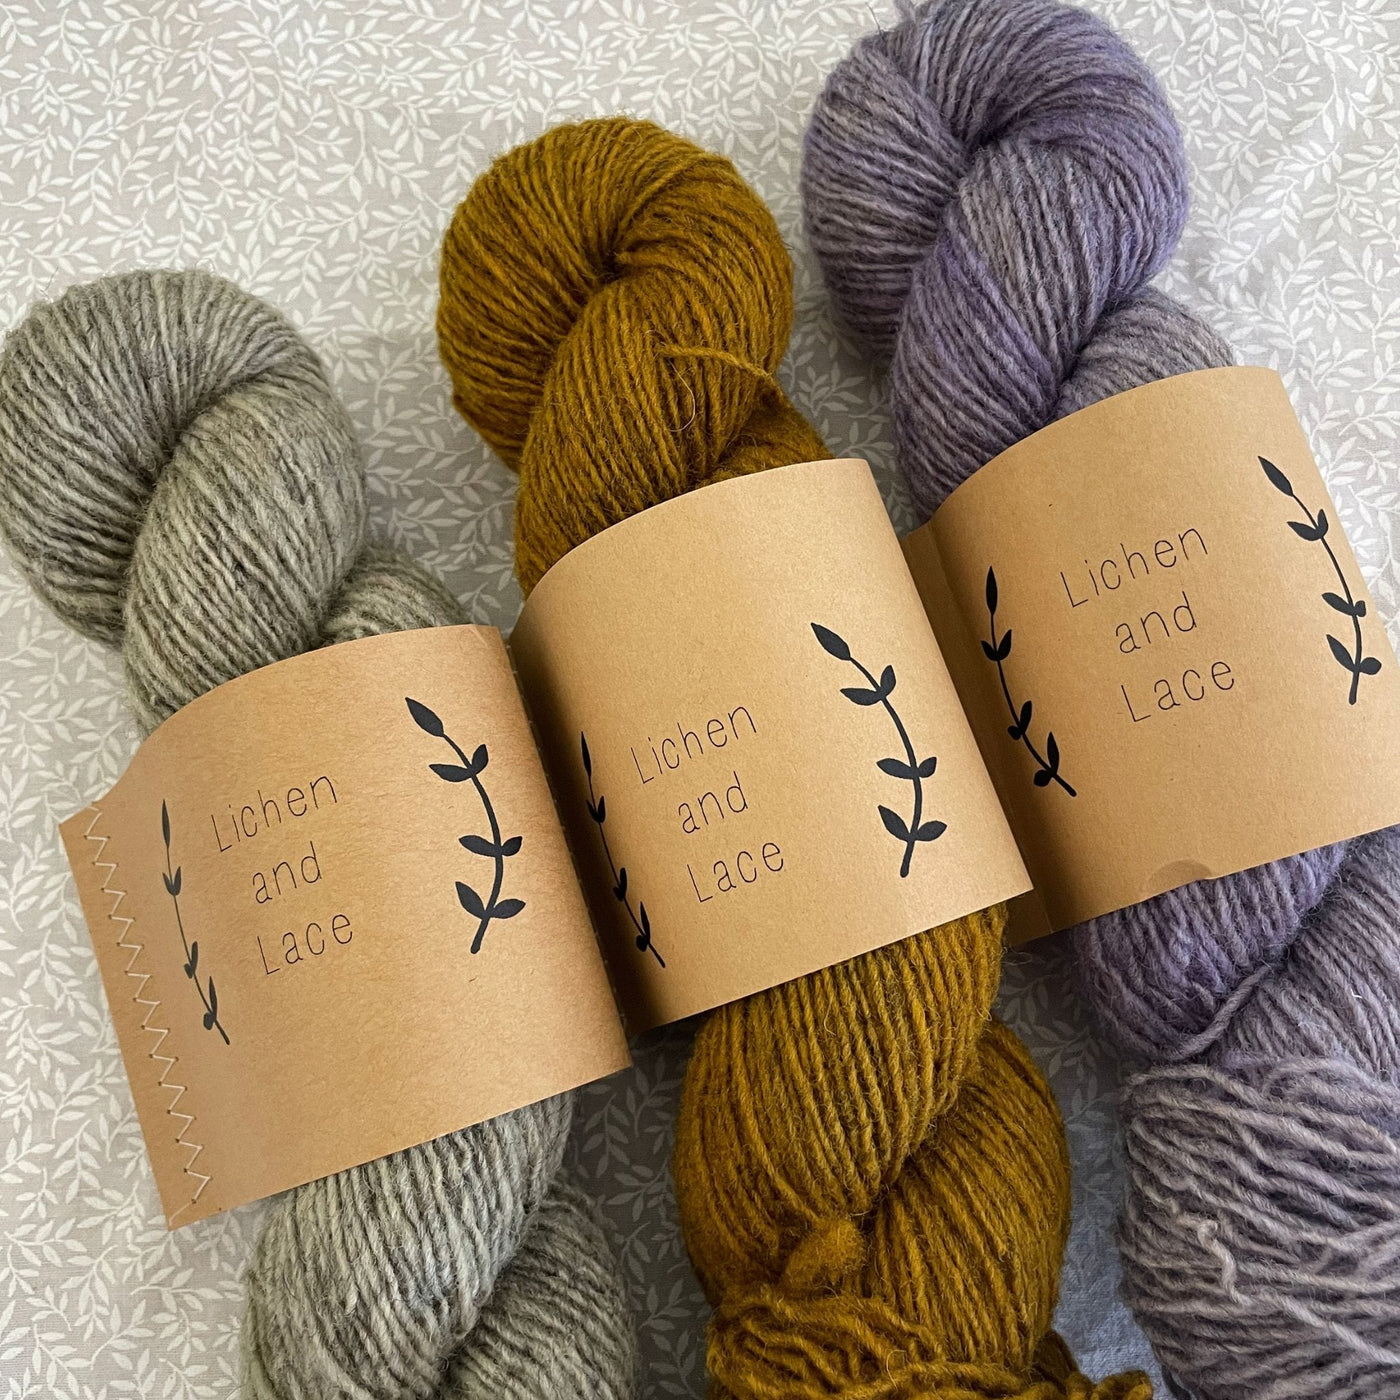 Three skeins of Lichen & Lace Rustic Heather Sport, a sport weight single-ply yarn